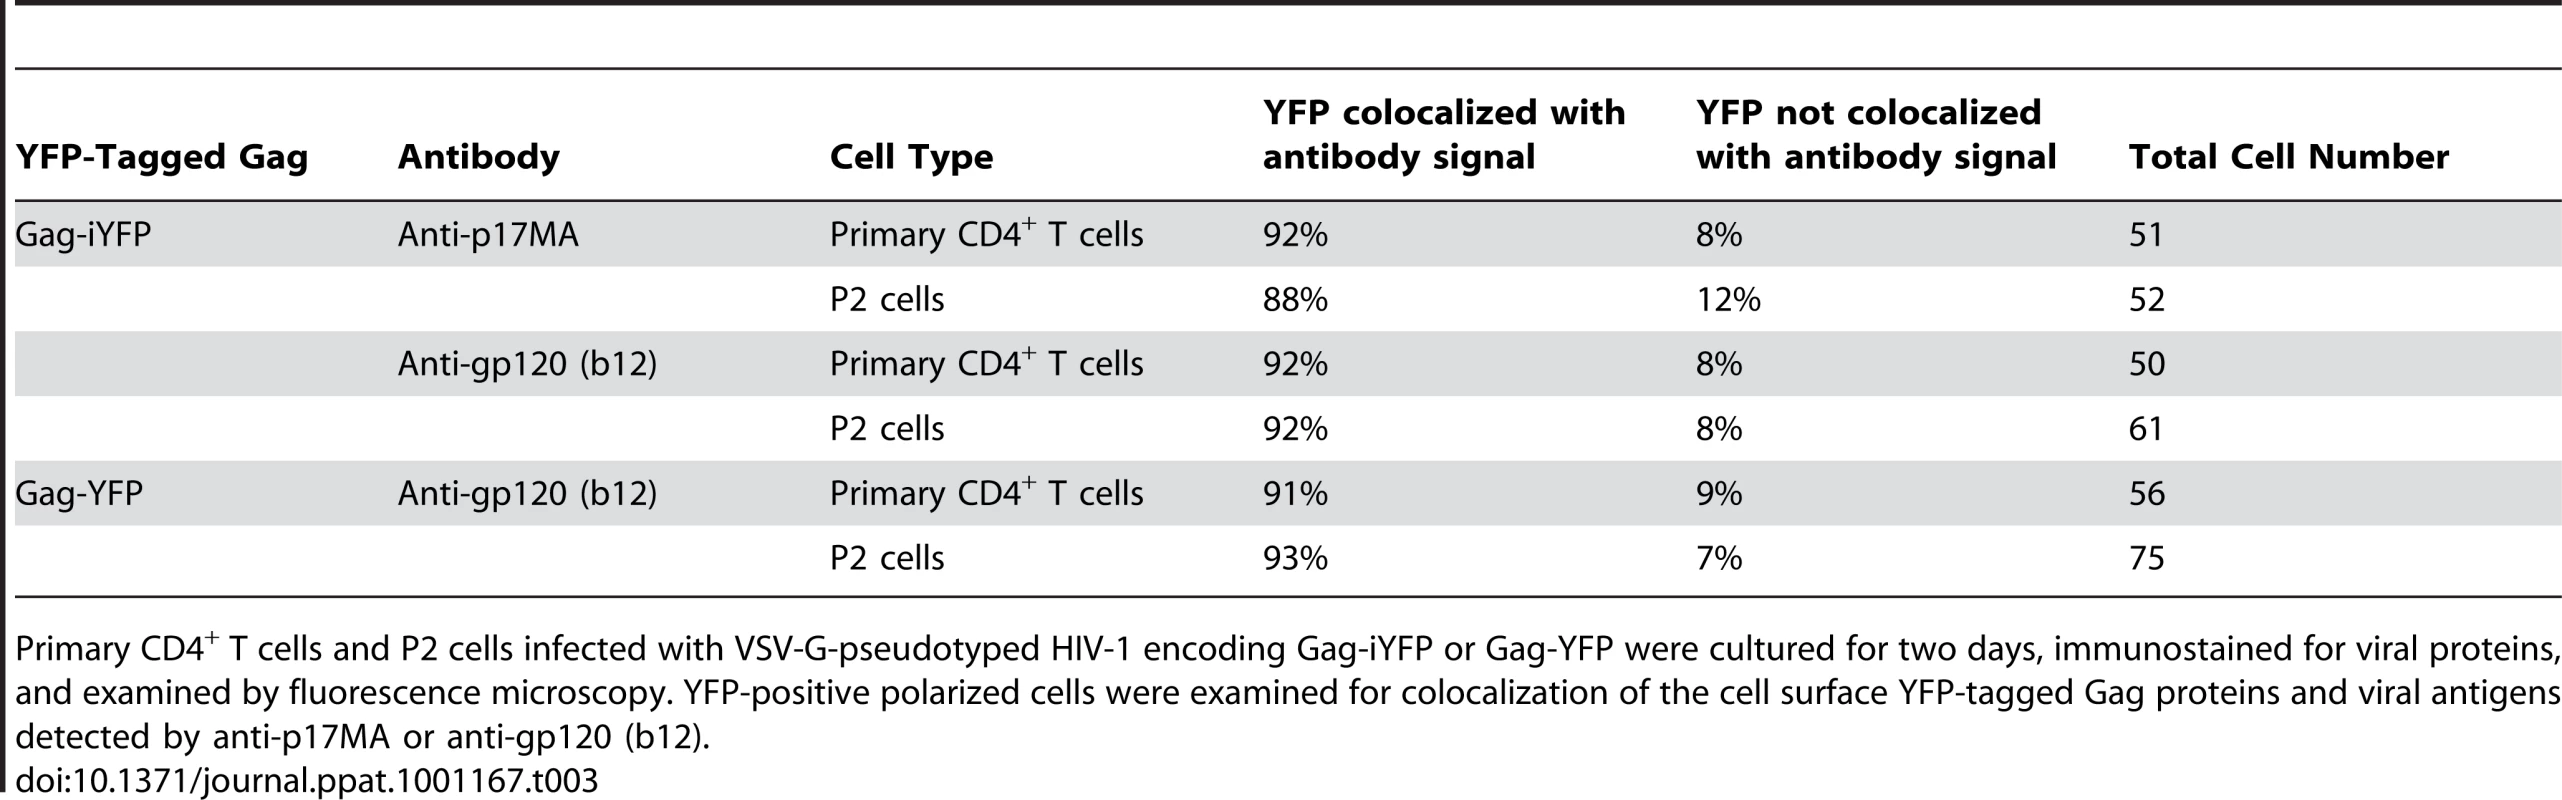 Colocalization of YFP-Tagged Gag with Antibody-Detected Viral Proteins.